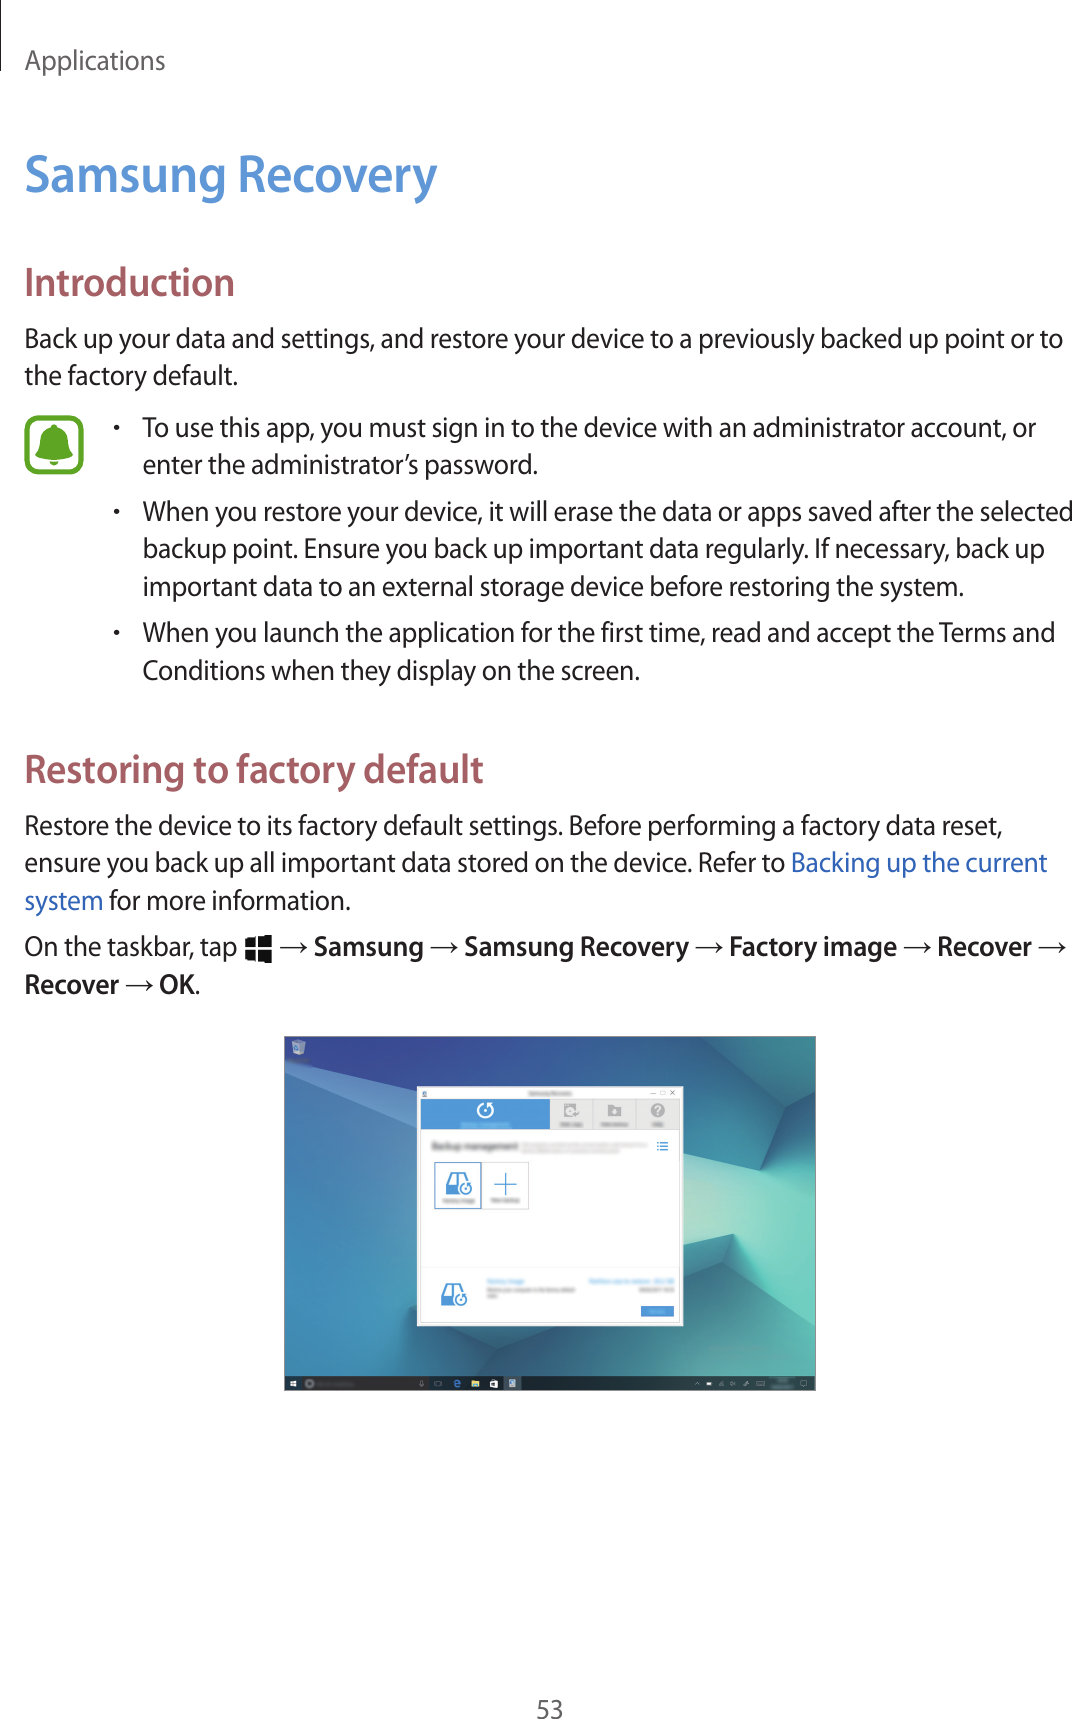 Applications53Samsung RecoveryIntroductionBack up your data and settings, and restore your device to a previously backed up point or to the factory default.•To use this app, you must sign in to the device with an administrator account, or enter the administrator’s password.•When you restore your device, it will erase the data or apps saved after the selected backup point. Ensure you back up important data regularly. If necessary, back up important data to an external storage device before restoring the system.•When you launch the application for the first time, read and accept the Terms and Conditions when they display on the screen.Restoring to factory defaultRestore the device to its factory default settings. Before performing a factory data reset, ensure you back up all important data stored on the device. Refer to Backing up the current system for more information.On the taskbar, tap   → Samsung → Samsung Recovery → Factory image → Recover → Recover → OK.